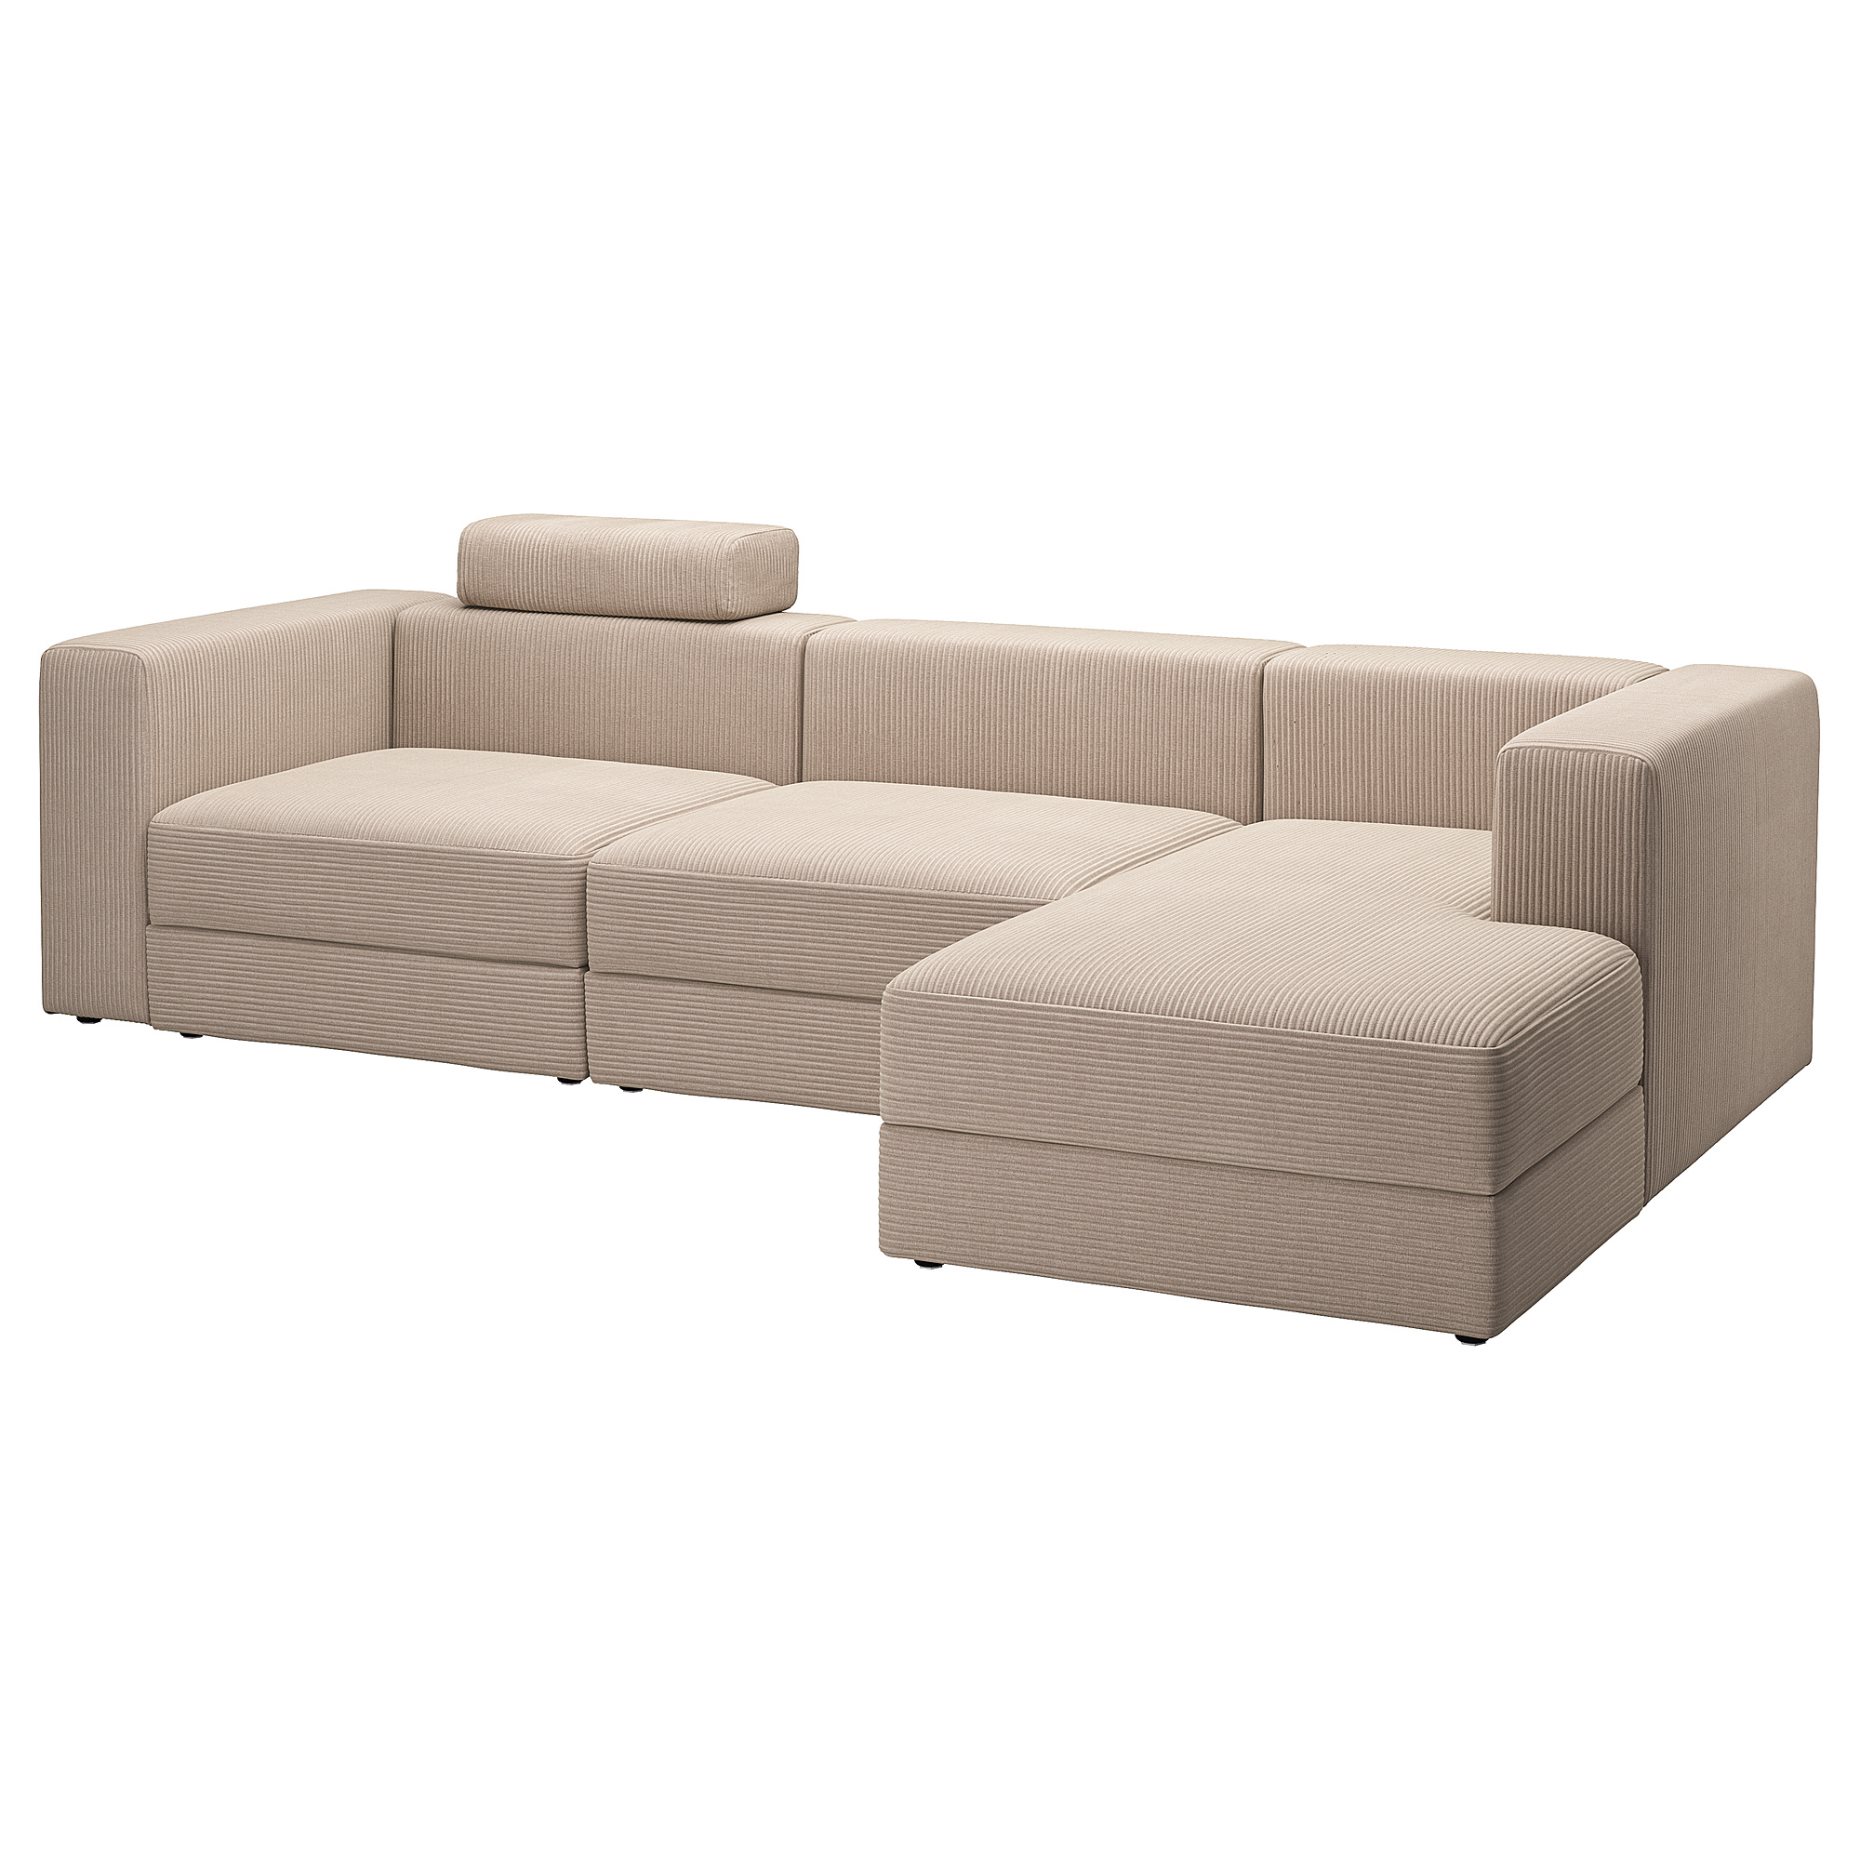 JÄTTEBO, 4-seat modular sofa with chaise longue/right with headrest, 395.108.97